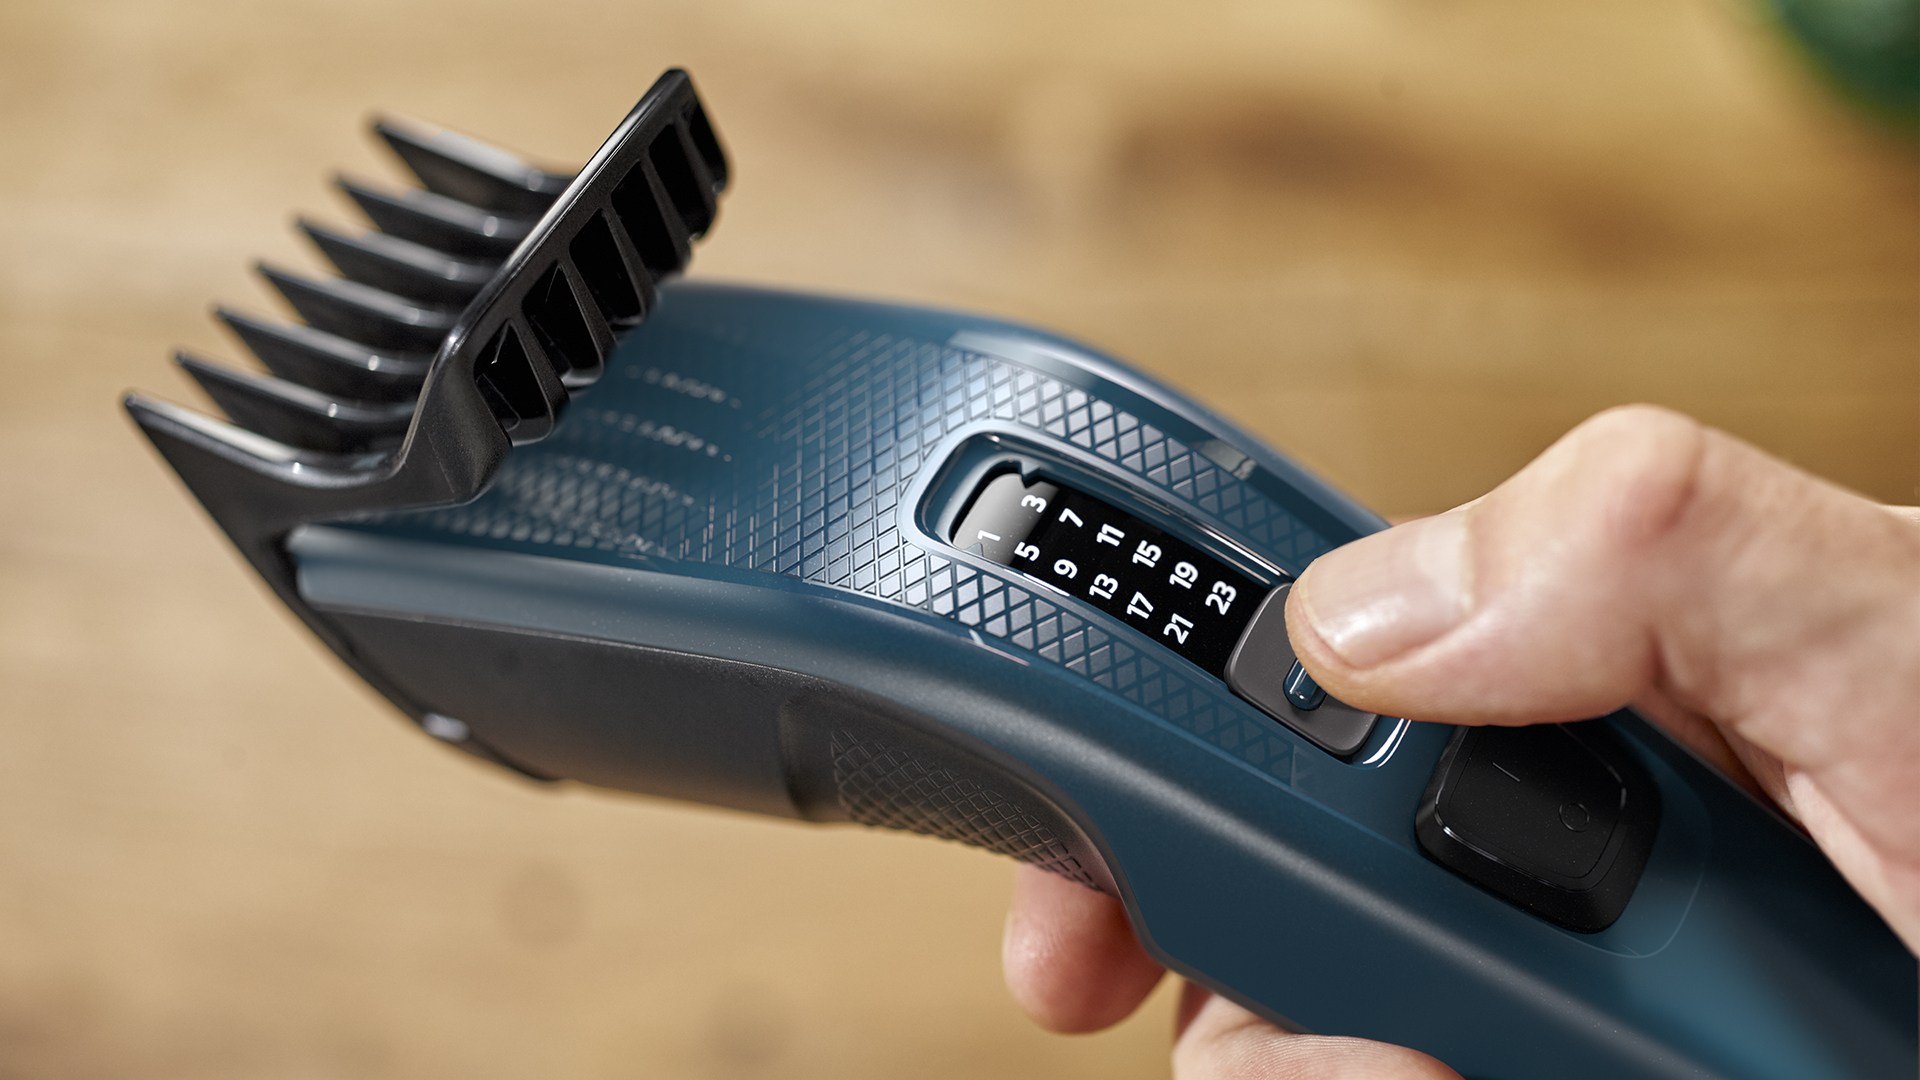 Philips introduces Hair Clippers for men, designed for an easy and even hair  cut at home